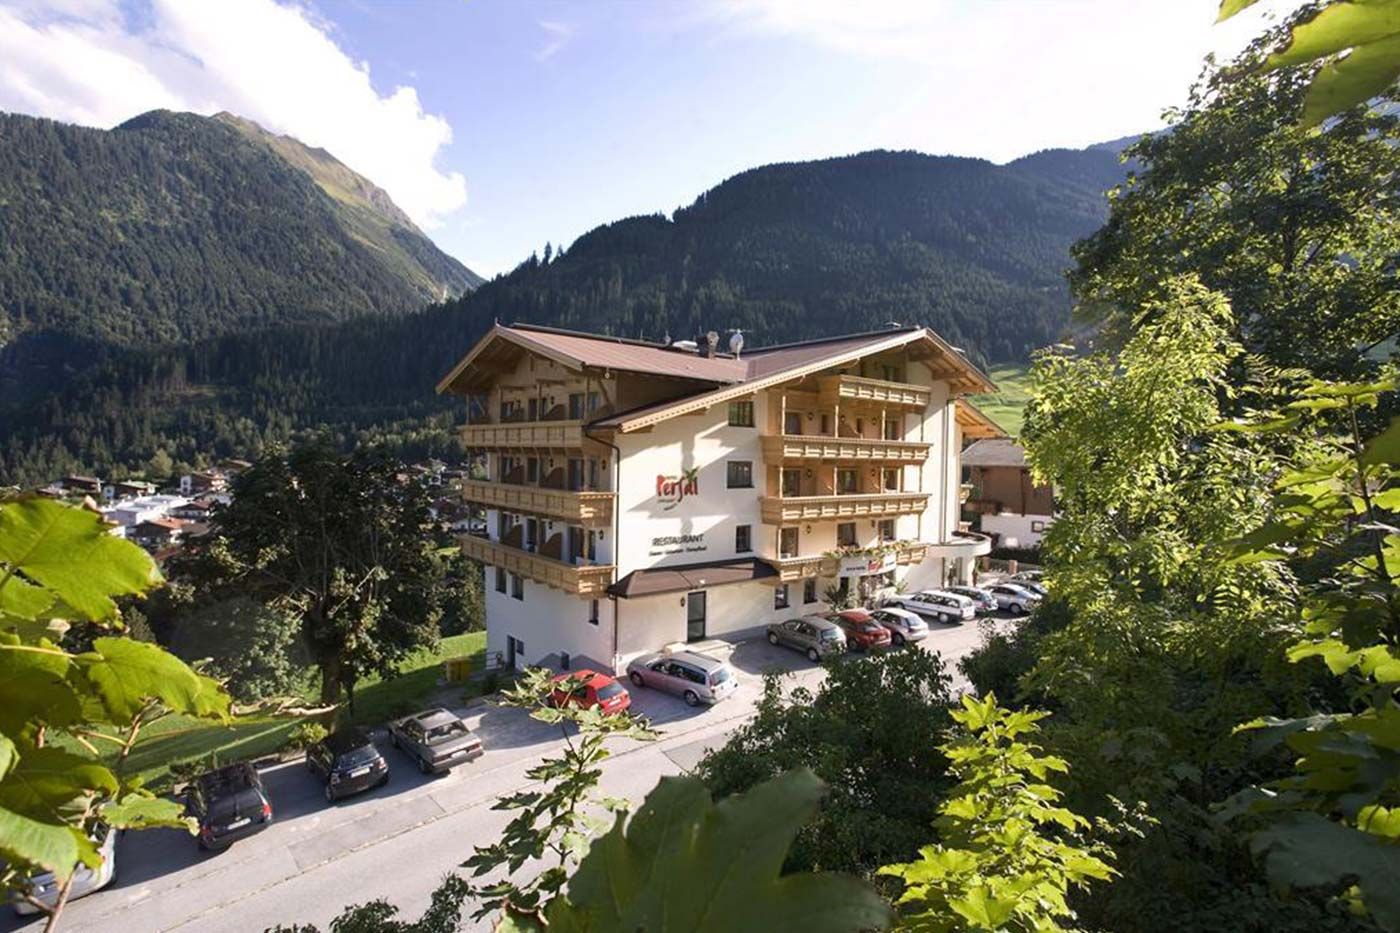 Your traditional Hotel in Finkenberg, surround by breathtaking mountain scenery.